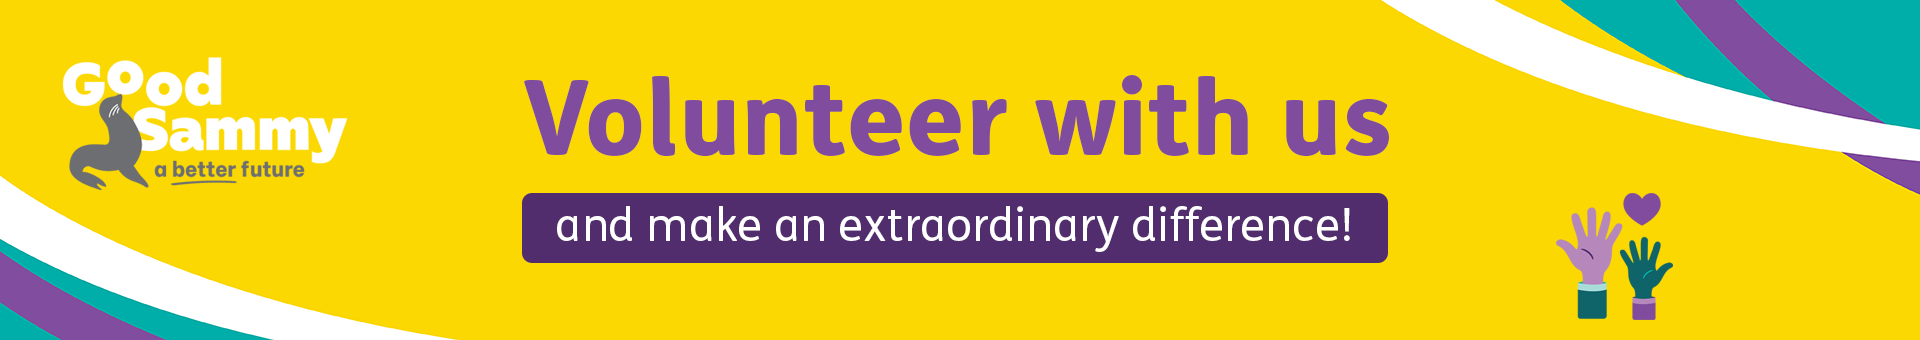 Volunteer with us and make an extraordinary difference!